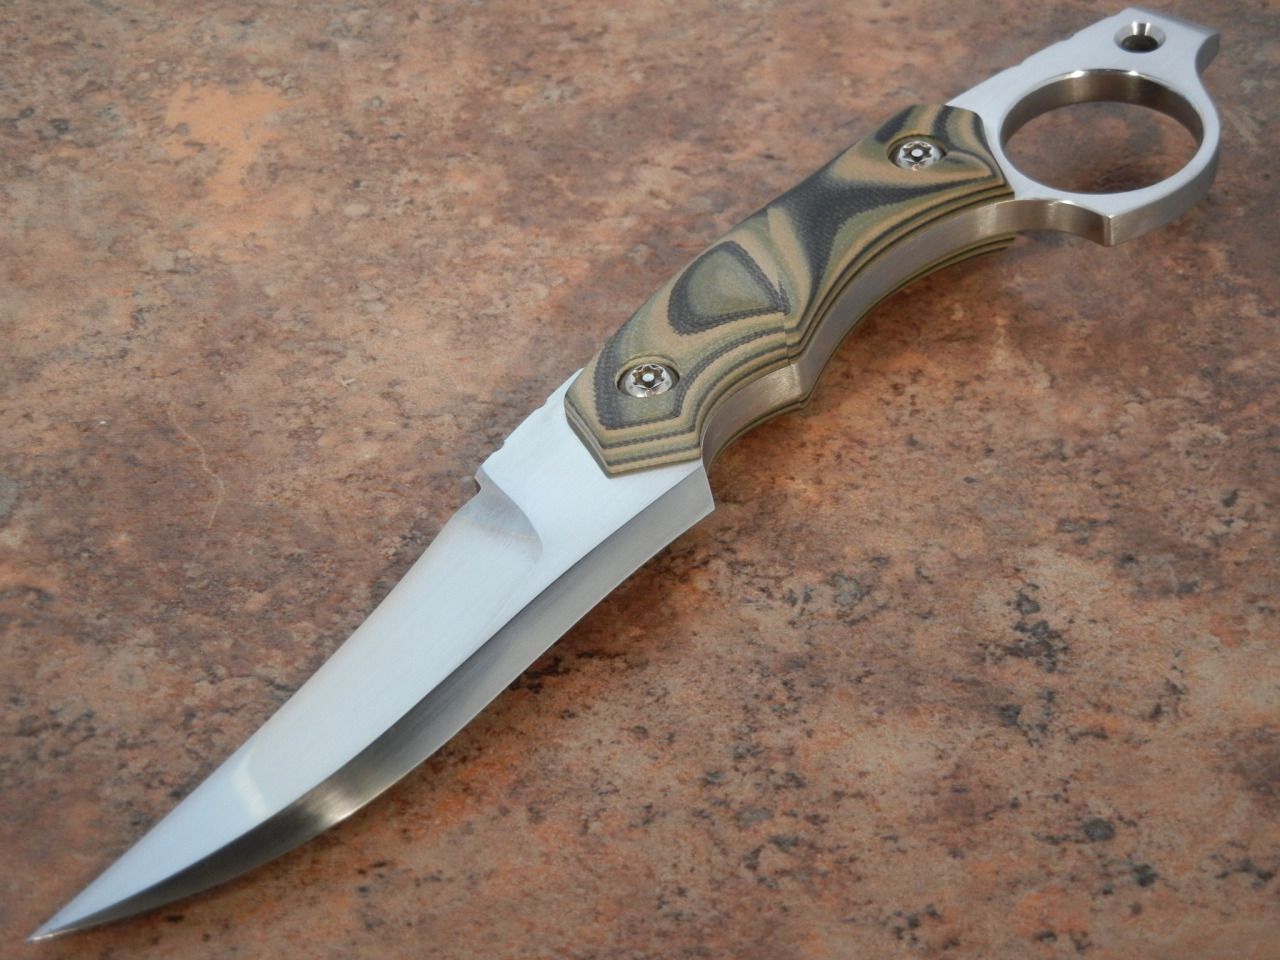 best knives images on pinterest knifes weapons and knives